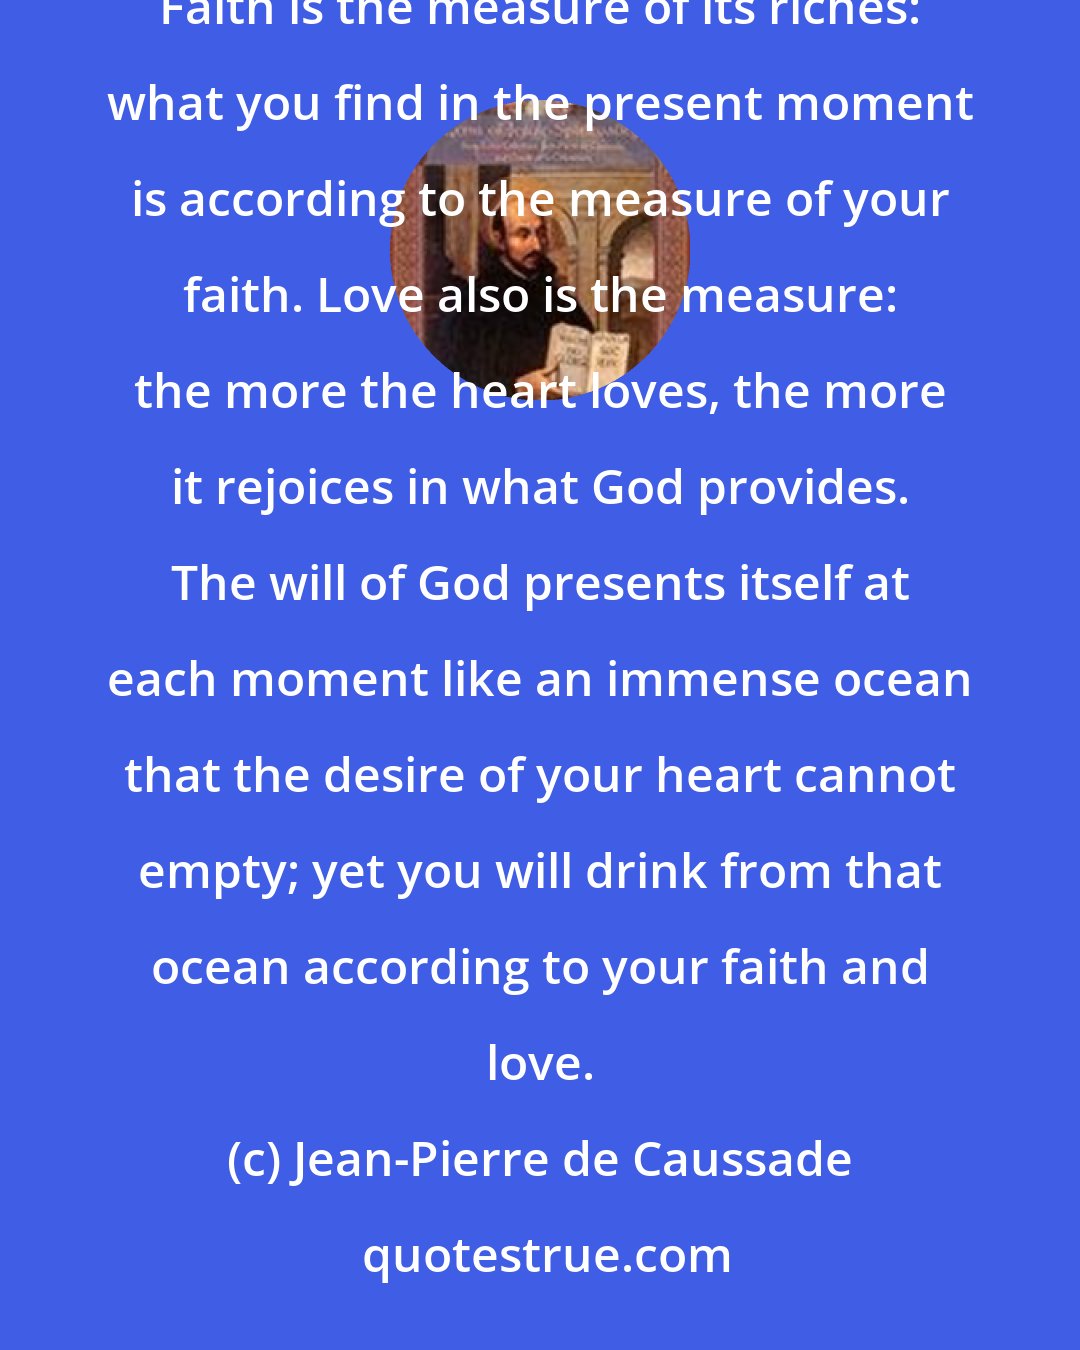 Jean-Pierre de Caussade: The present moment is always full of infinite treasure. It contains far more than you can possibly grasp. Faith is the measure of its riches: what you find in the present moment is according to the measure of your faith. Love also is the measure: the more the heart loves, the more it rejoices in what God provides. The will of God presents itself at each moment like an immense ocean that the desire of your heart cannot empty; yet you will drink from that ocean according to your faith and love.